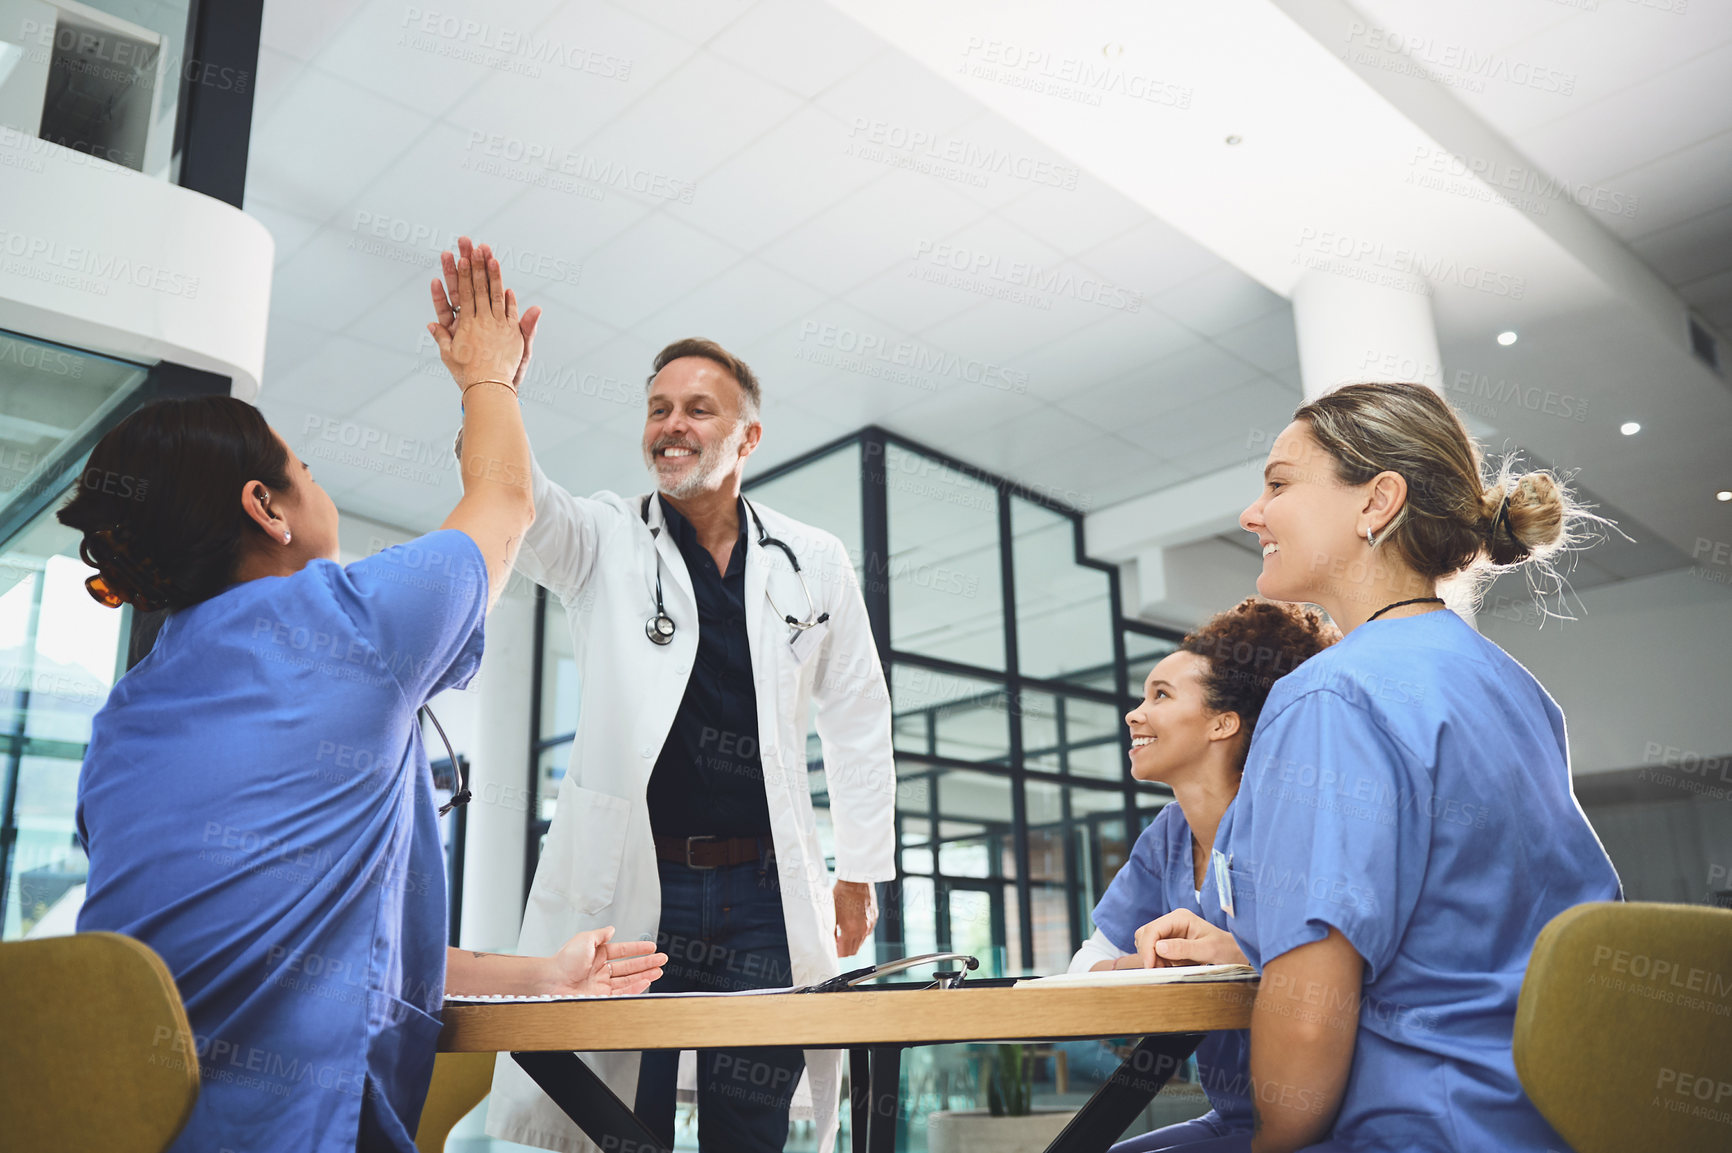 Buy stock photo Shot of a team of doctors giving each other a high five in a hospital